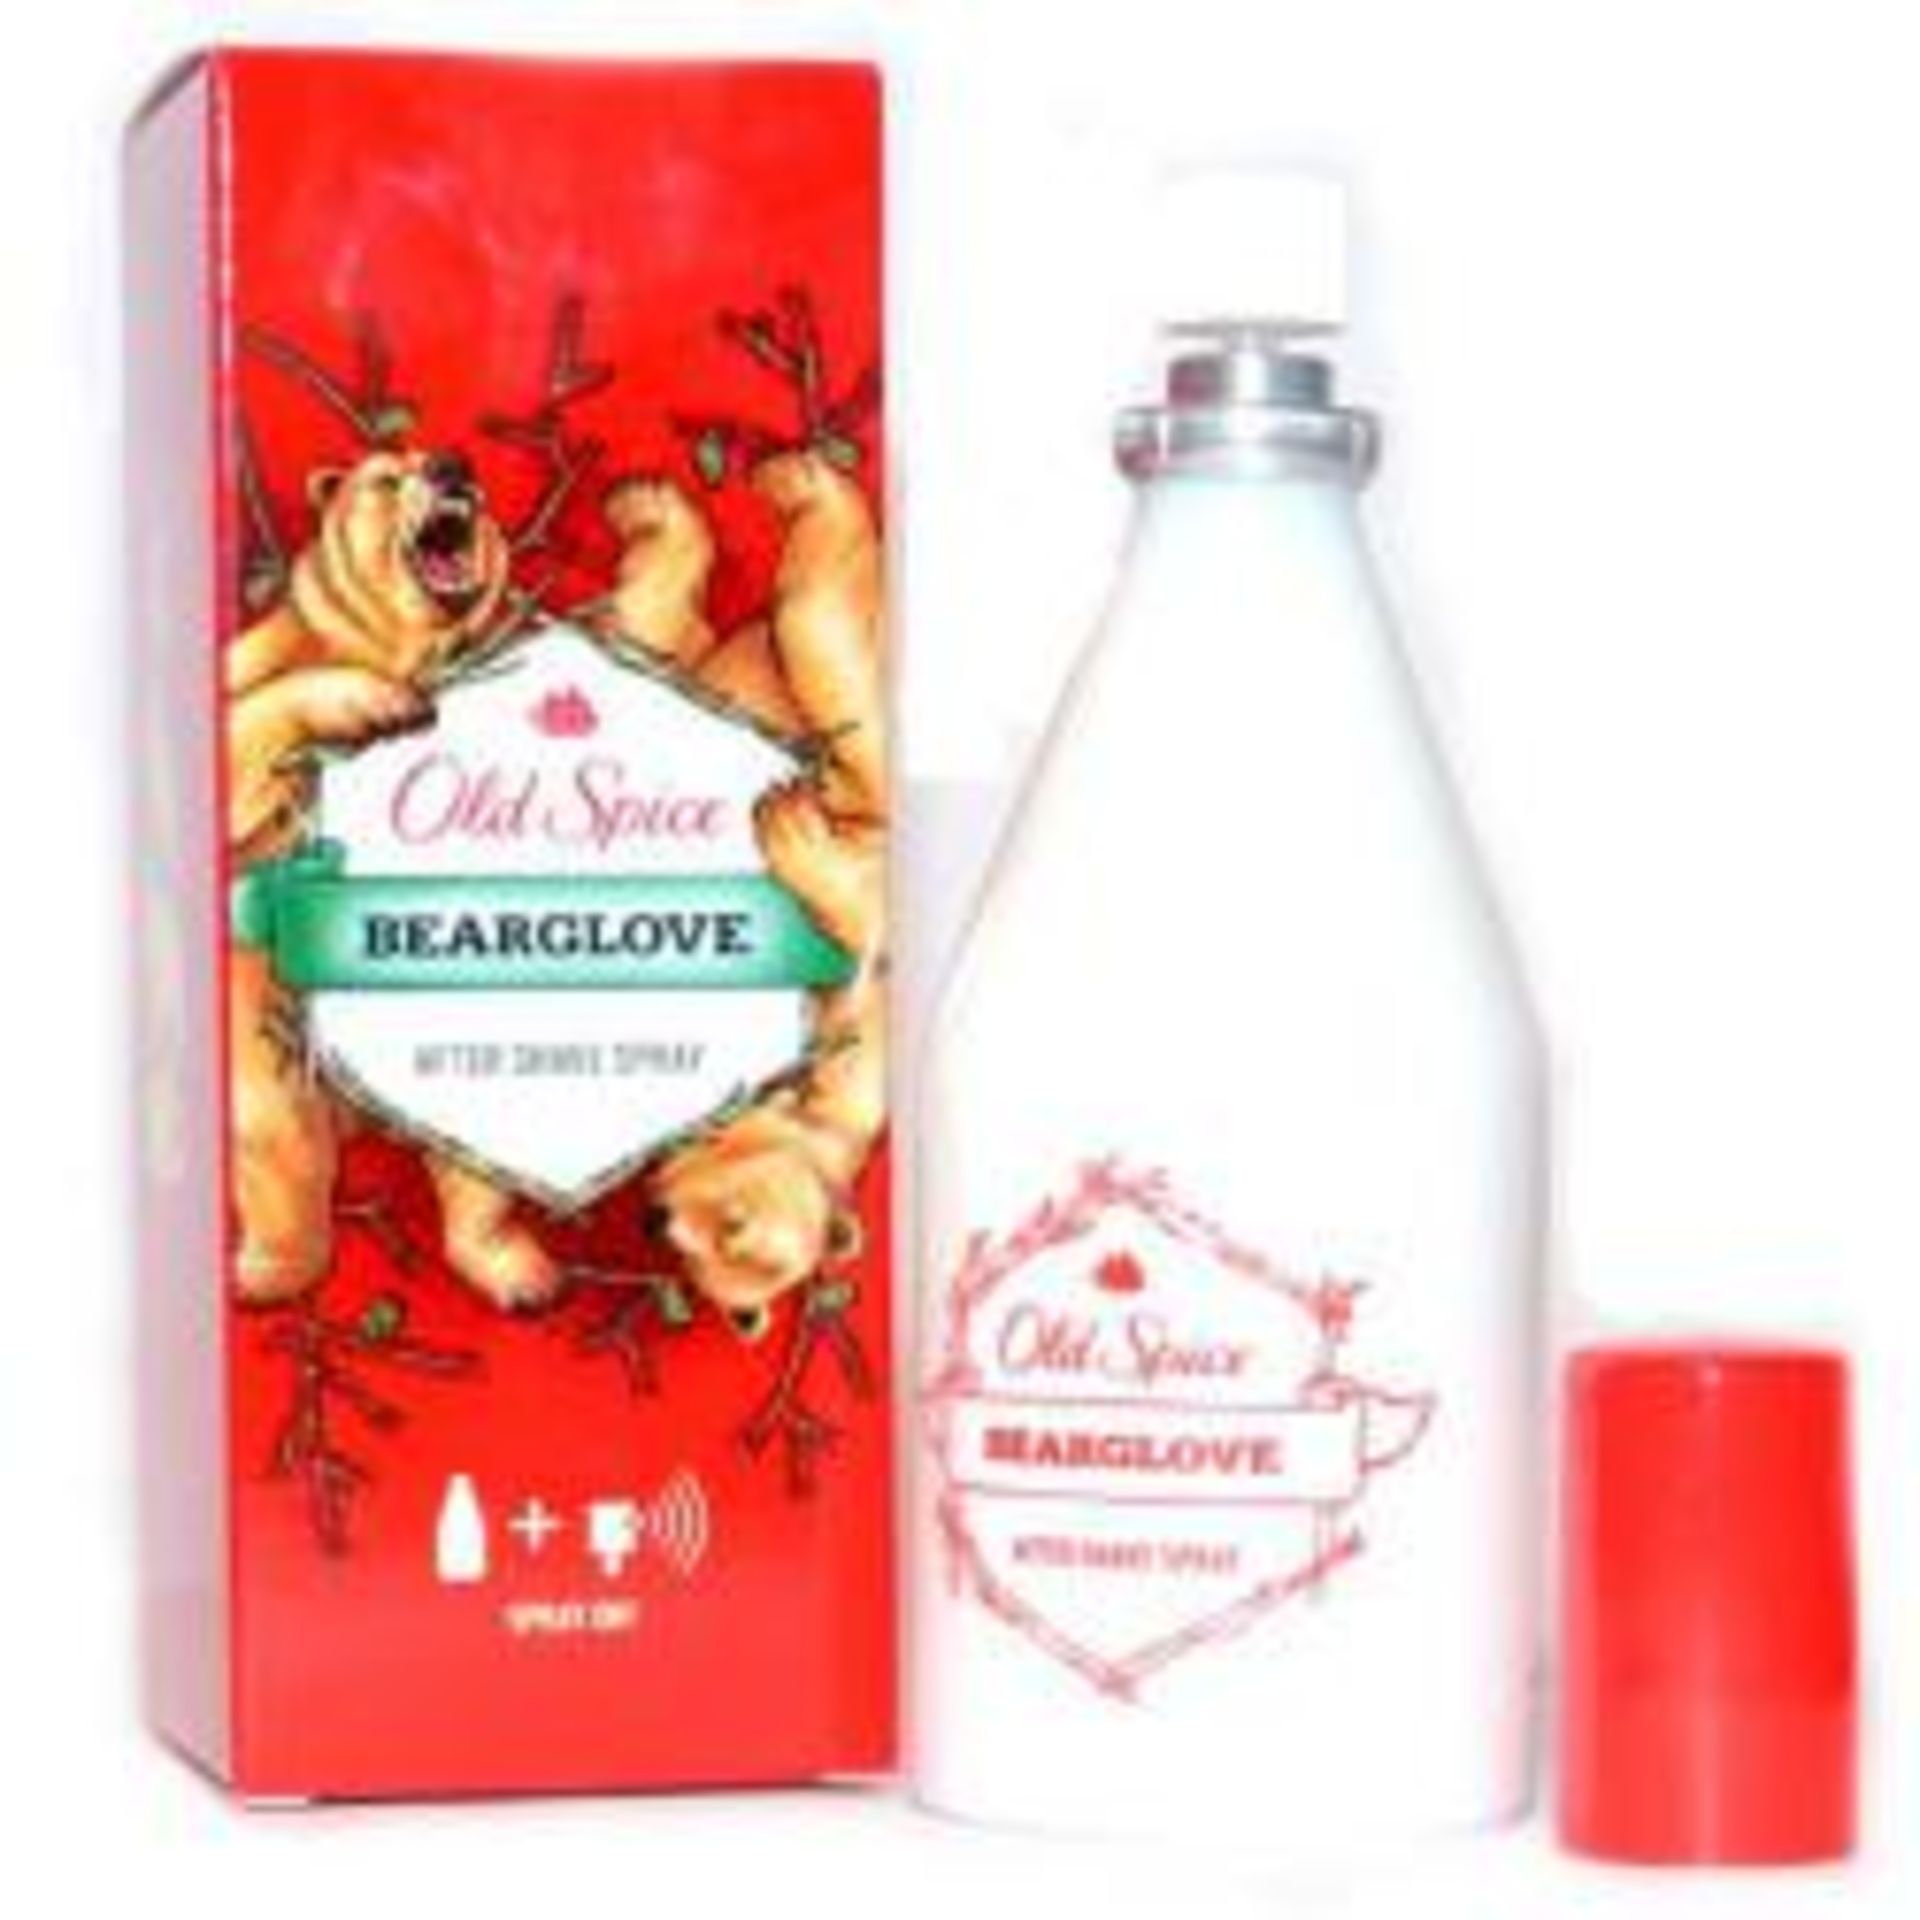 V Brand New Old Spice Aftershave Bearglove 100ml RRP £9.00 (Item available after 14/9/2016) X 2 YOUR